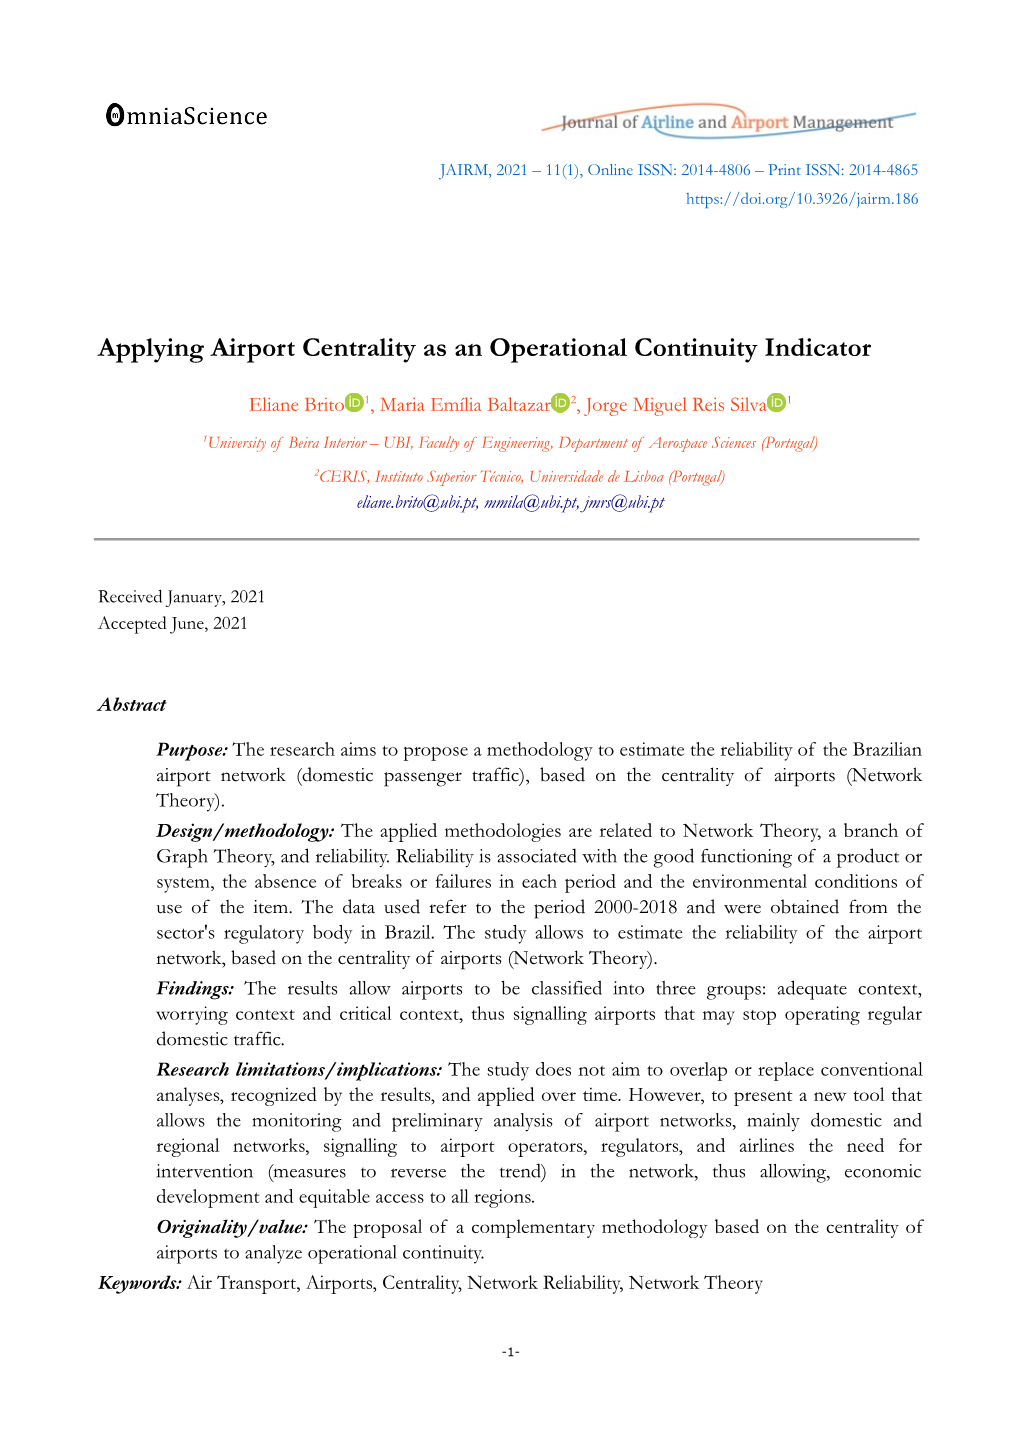 Applying Airport Centrality As an Operational Continuity Indicator